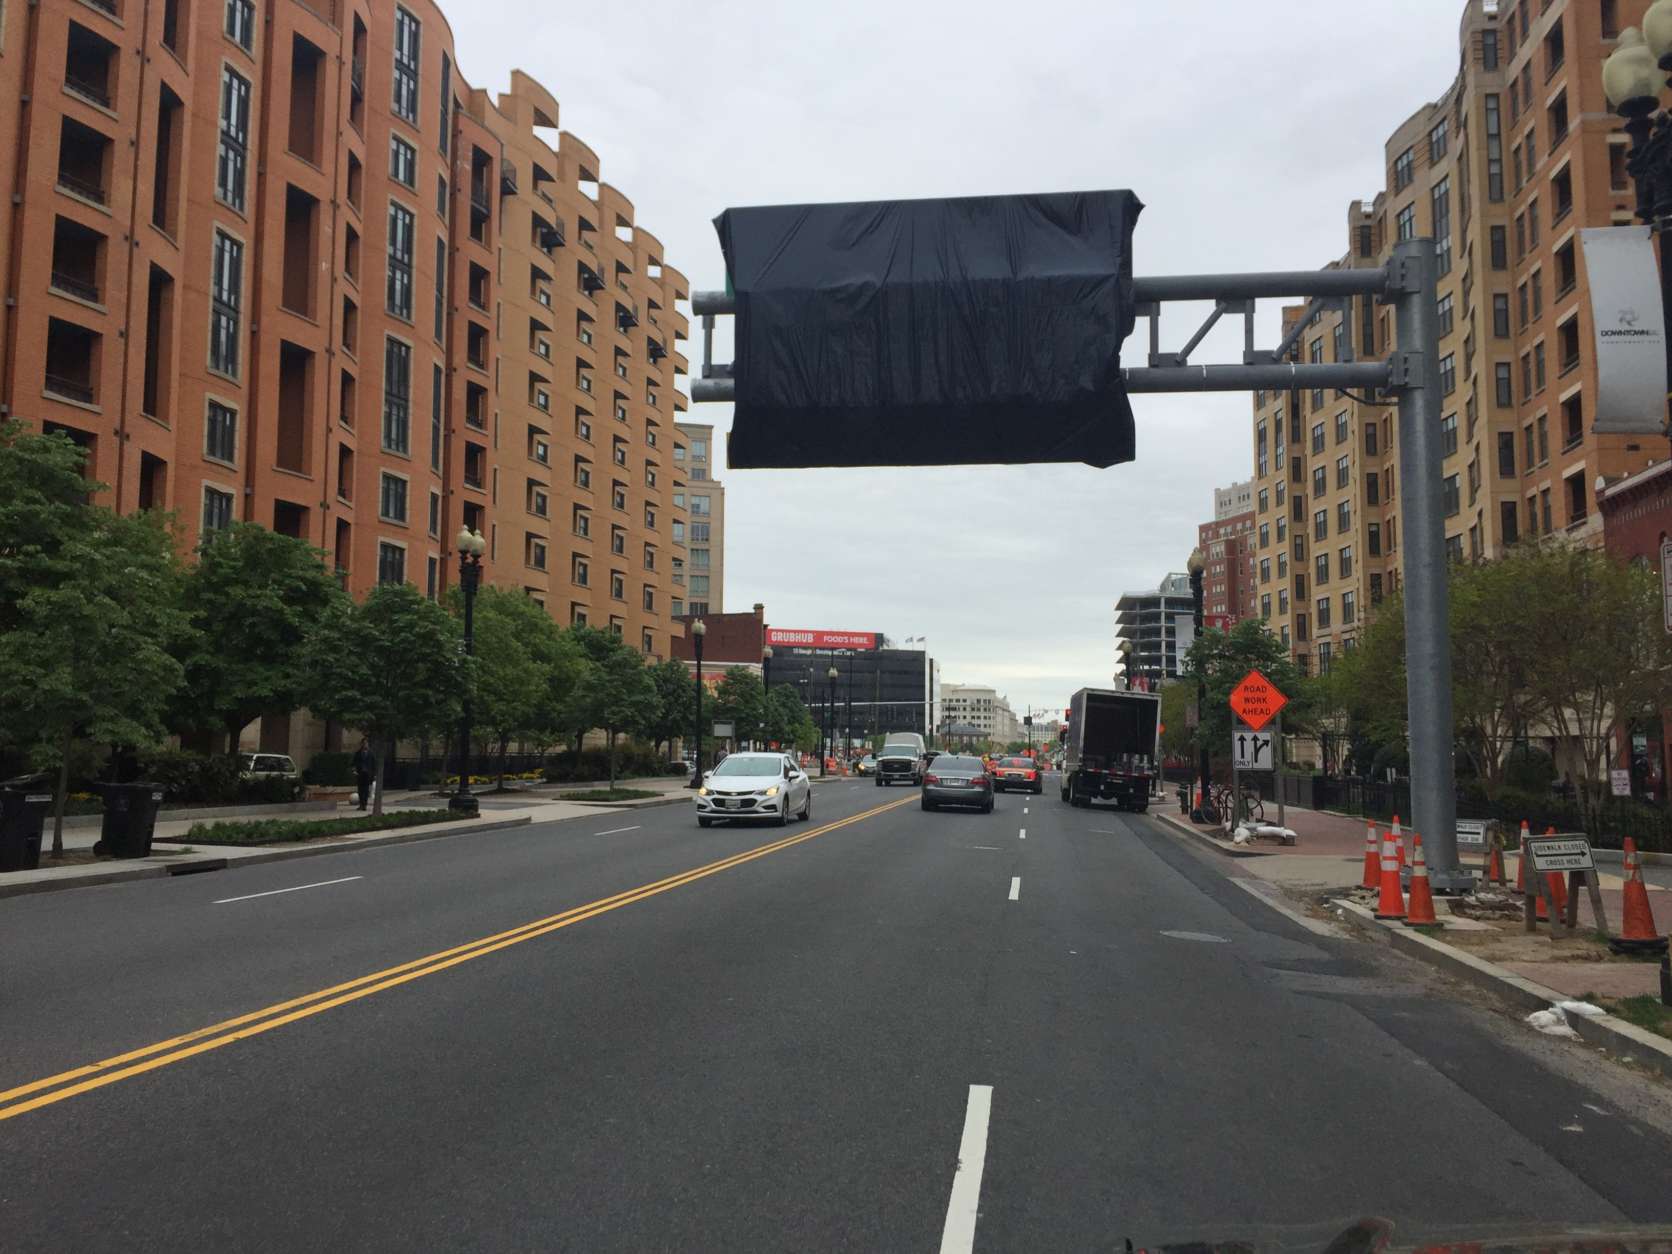 When the new portal/ramp opens, traffic control officers and dynamic message boards will work to acclimate drivers to new traffic patterns. (WTOP/Kristi King)